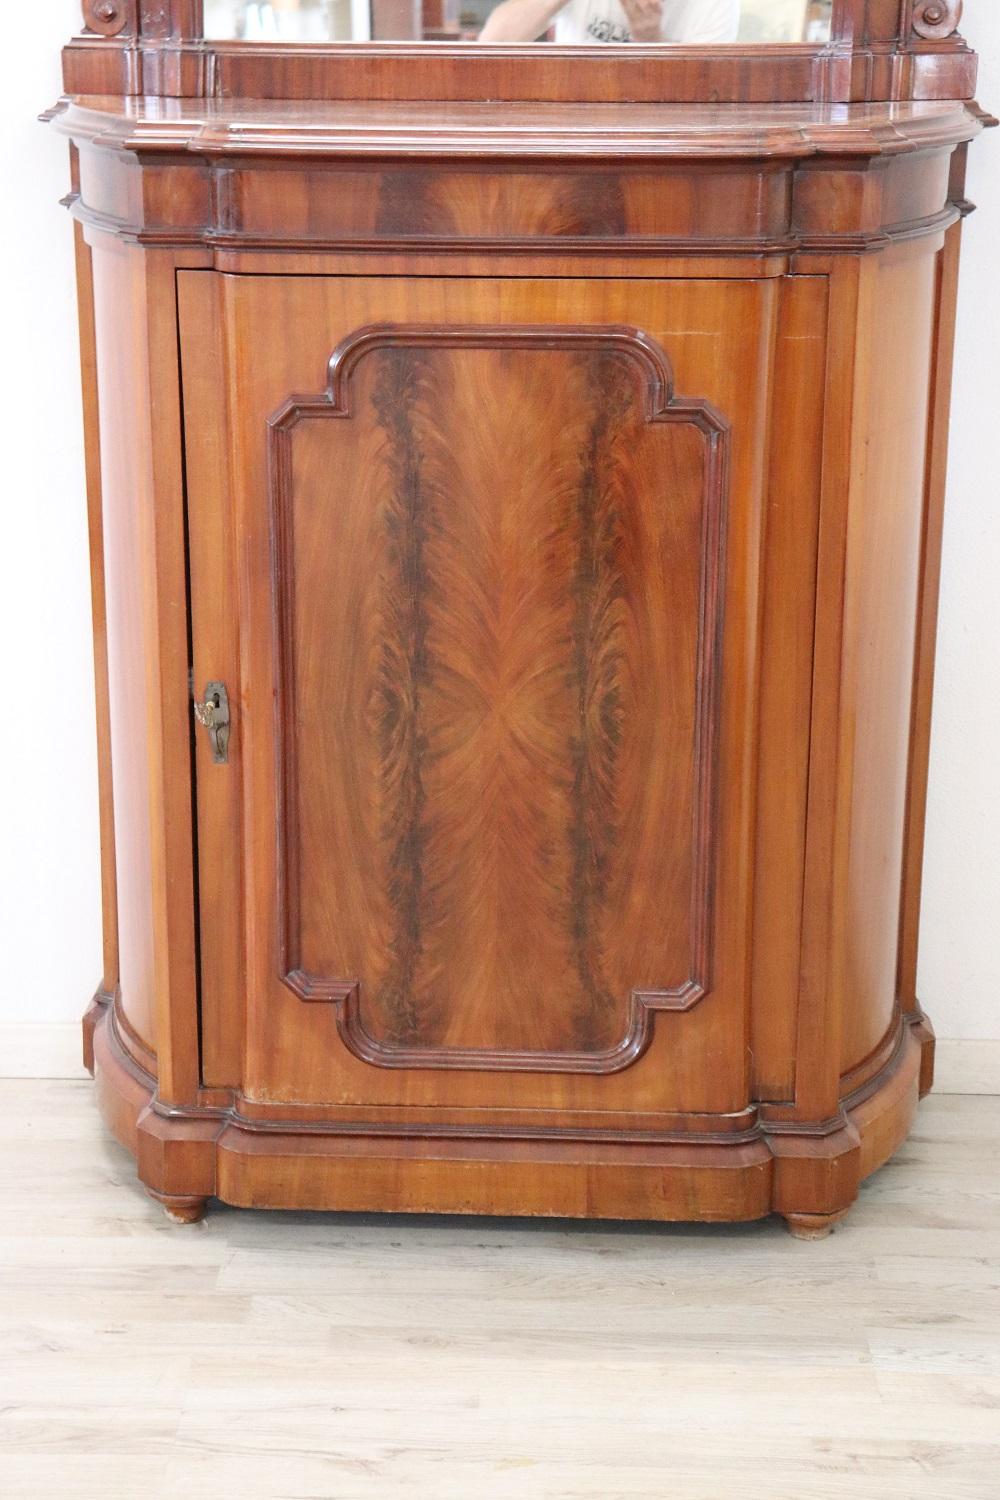 Small cabinet very simple and linear characterized by walnut wood with root in the central part of the door. Equipped with two internal shelves. In the upper part a beautiful large mirror with a medallion carved in the tip. Perfect conditions.